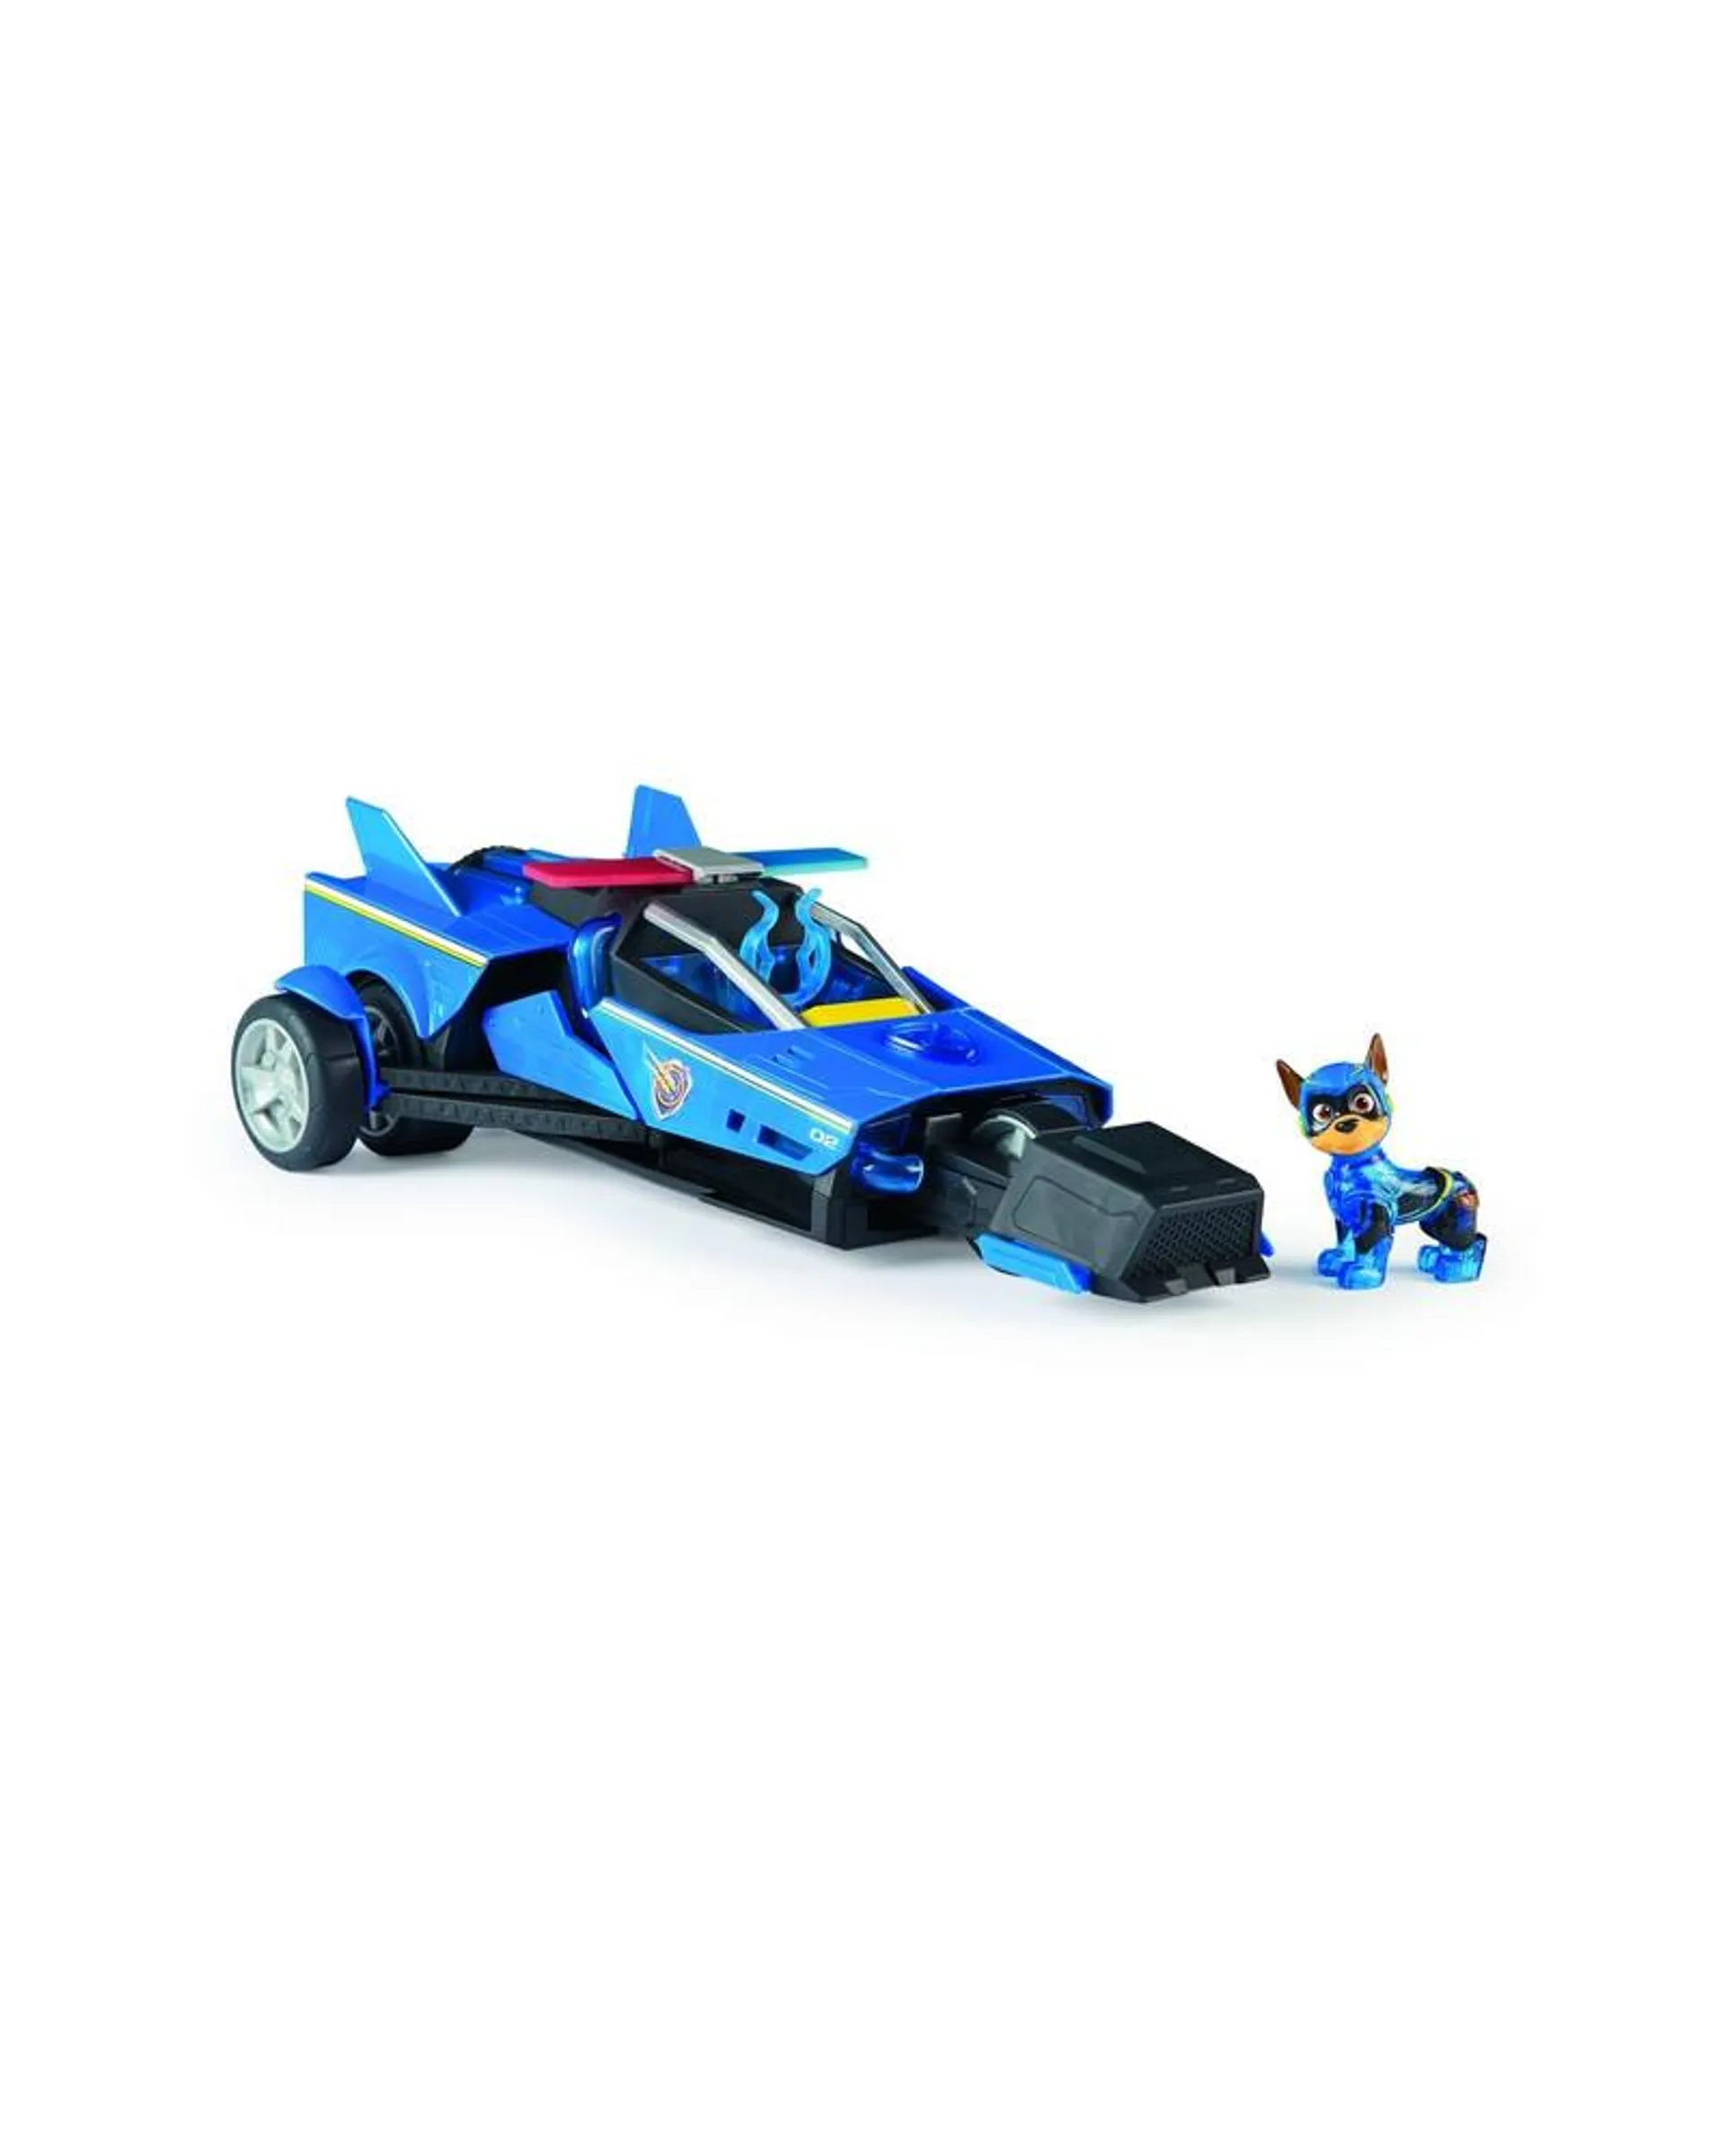 PAW PATROL MIGHTY MOVIE VEH. LUXE CHASE